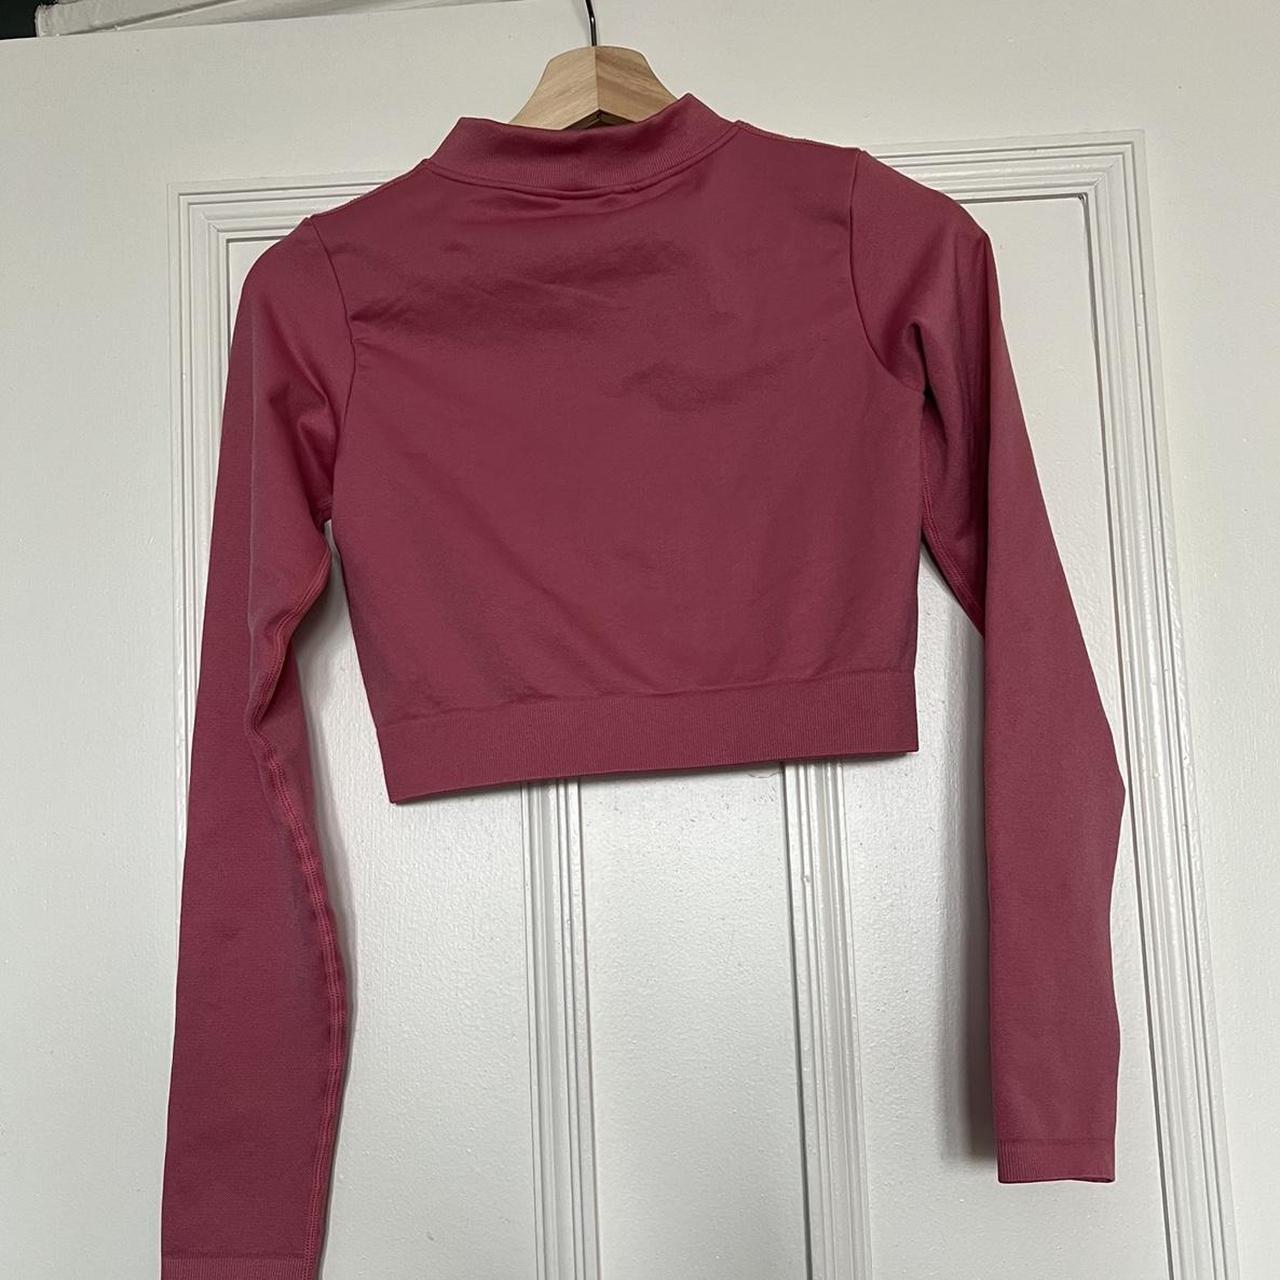 Bo and Tee long sleeve sports top in size M! Never... - Depop